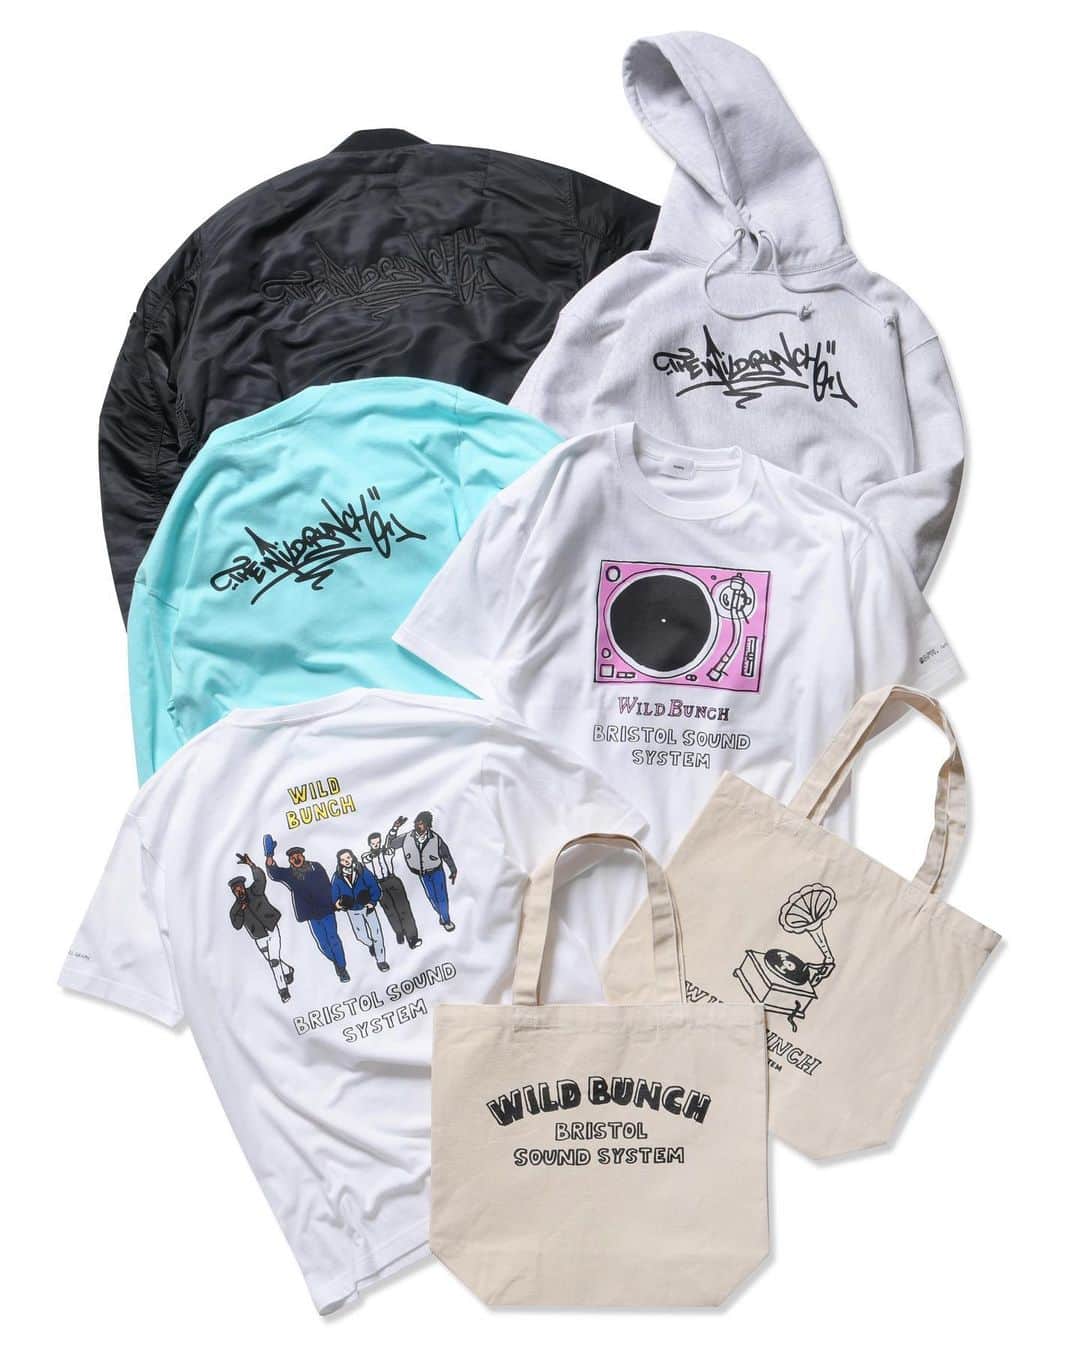 ソフのインスタグラム：「“SOPH. × WILD BUNCH 40TH ANNIVERSARY COLLECTION" RELEASE on NOVEMBER 23 (THU)  SOPH.に欠かすことのできないルーツの一つであり、世界中の音楽カルチャーに大きなインパクトを与えたWILD BUNCHが今年40周年を迎えました。  これを記念し、WILD BUNCHと関係の深かったBrim(Tats Cru)による当時のタギングを落とし込んだアイテムと、”Naijel Graph"が手掛けたグラフィックによるアイテムを展開。MA-1やスウェットフーディ、トートバッグなど、バラエティ豊かなラインナップです。  11/23(木)より、SOPH.shopにて、同日正午よりSOPH. ONLINE STOREにて発売。  *入荷状況、販売方法は店舗によって異なりますので、詳細は各店舗までお問い合わせください。 *SOPH.shopでの通販につきましては、11/24(金)からとなります。  WILD BUNCH, one of the indispensable roots of SOPH. and a major impact on music culture worldwide, celebrates its 40th anniversary this year.  To commemorate this anniversary, items incorporating tagging from that time by Brim (Tats Cru), who had a close relationship with WILD BUNCH, and graphics by "Naijel Graph" have been developed. The lineup is rich in variety, including MA-1s, sweatshirt hoodies, tote bags, and more.  Available at SOPH.shops from 11/23(Thu), and SOPH. ONLINE STORE from 12:00pm(JST) on the same day.  *Please contact each store for details as the availability and sales method differ depending on the store. *As for the mail order at SOPH.shops, it starts from 11/24(Fri).  www.soph.net . #WildBunch #TheWildBunch #DjMilo #DaddyG #NelleeHooper #3D #WillieWee  #Brim #TatsCru #NaijelGraph  #SOPHxWildBunch #SOPHxTheWildBunch #SOPH   @wild_bunch_bristol @macandal61 @daddygofficial @nelleehooper1 @robert3delnaja @brim1tatscru @naijelgraph」